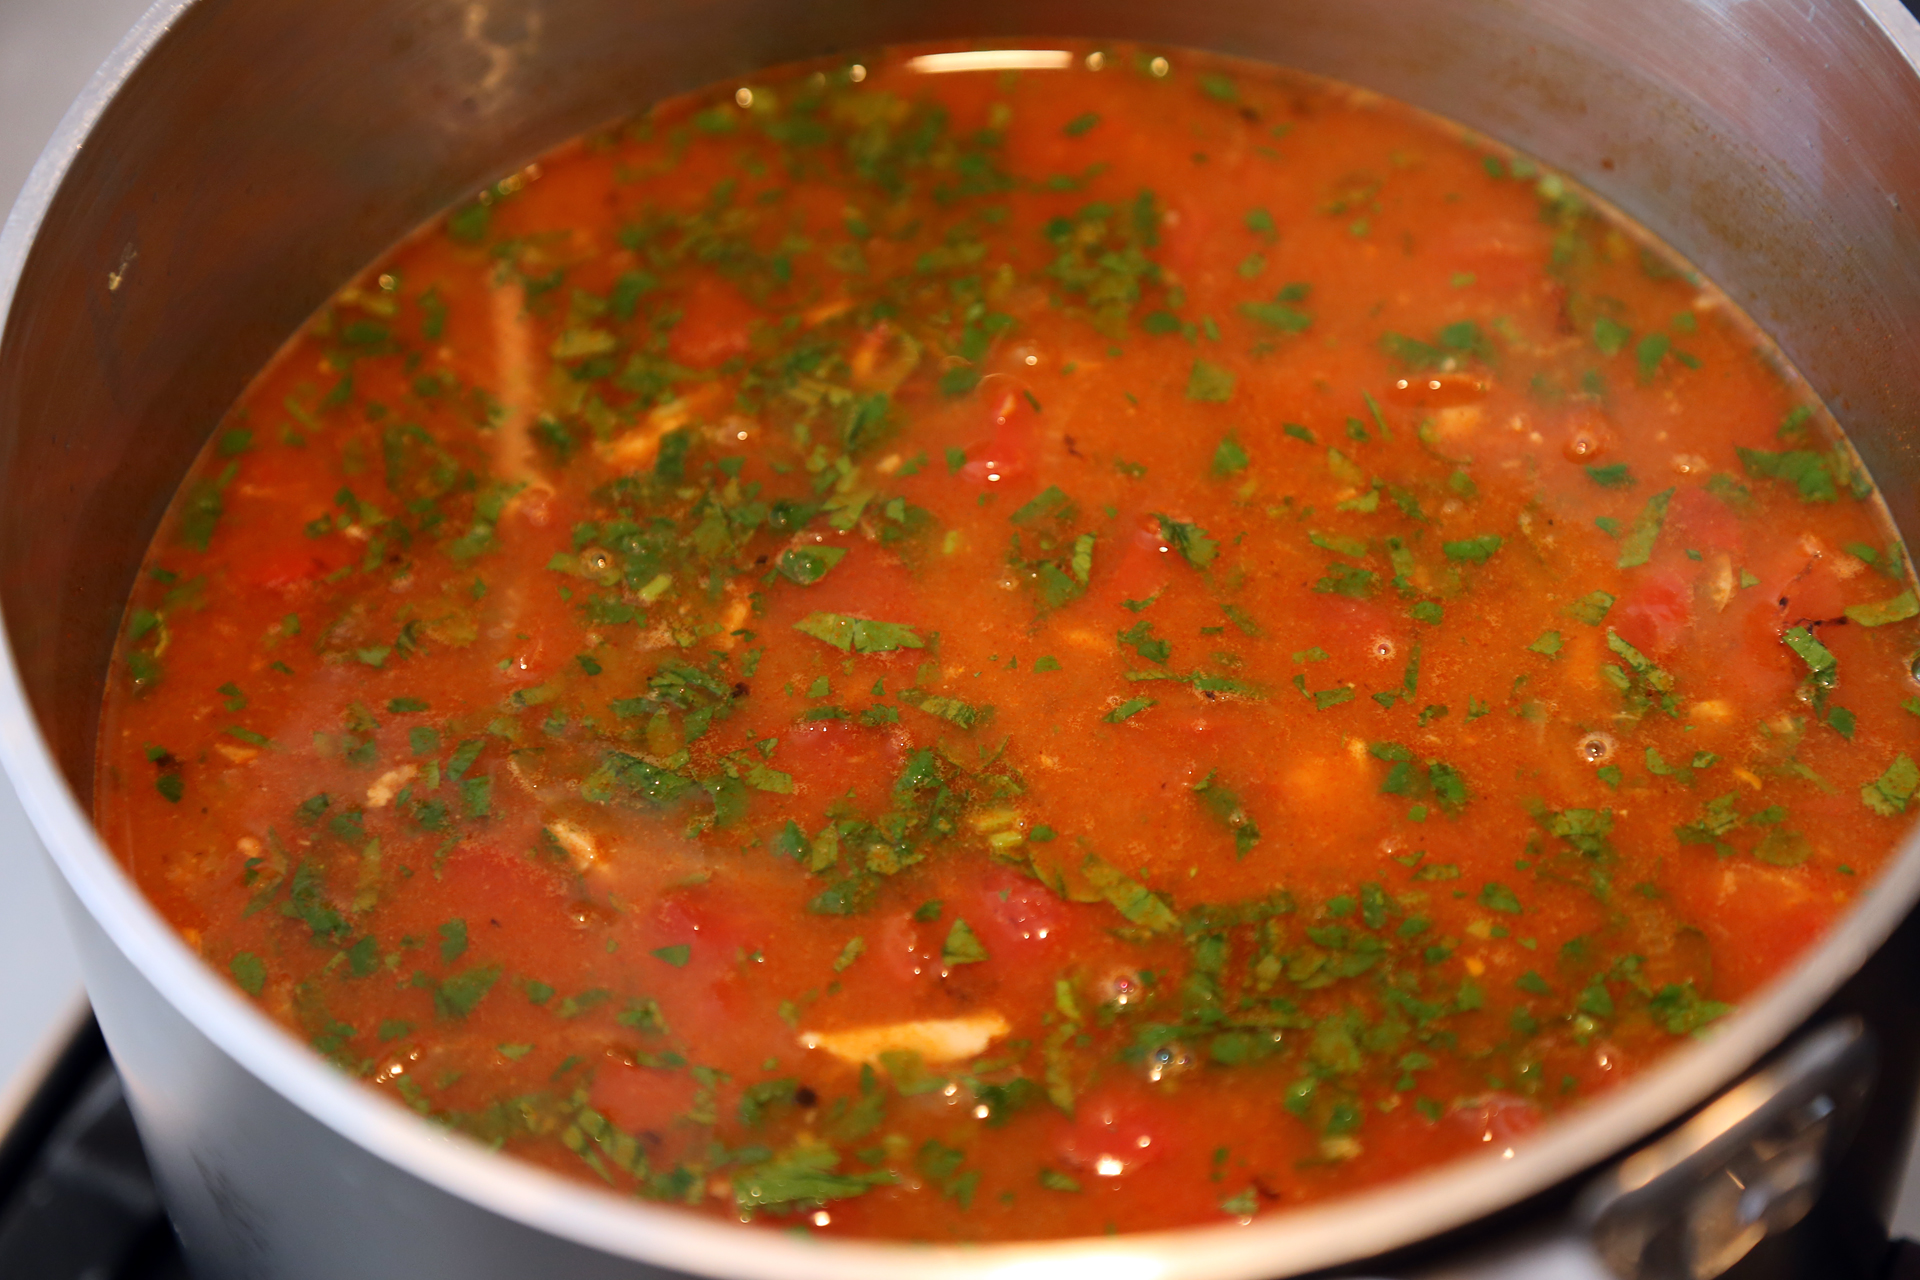 Add cilantro and simmer until warmed through.